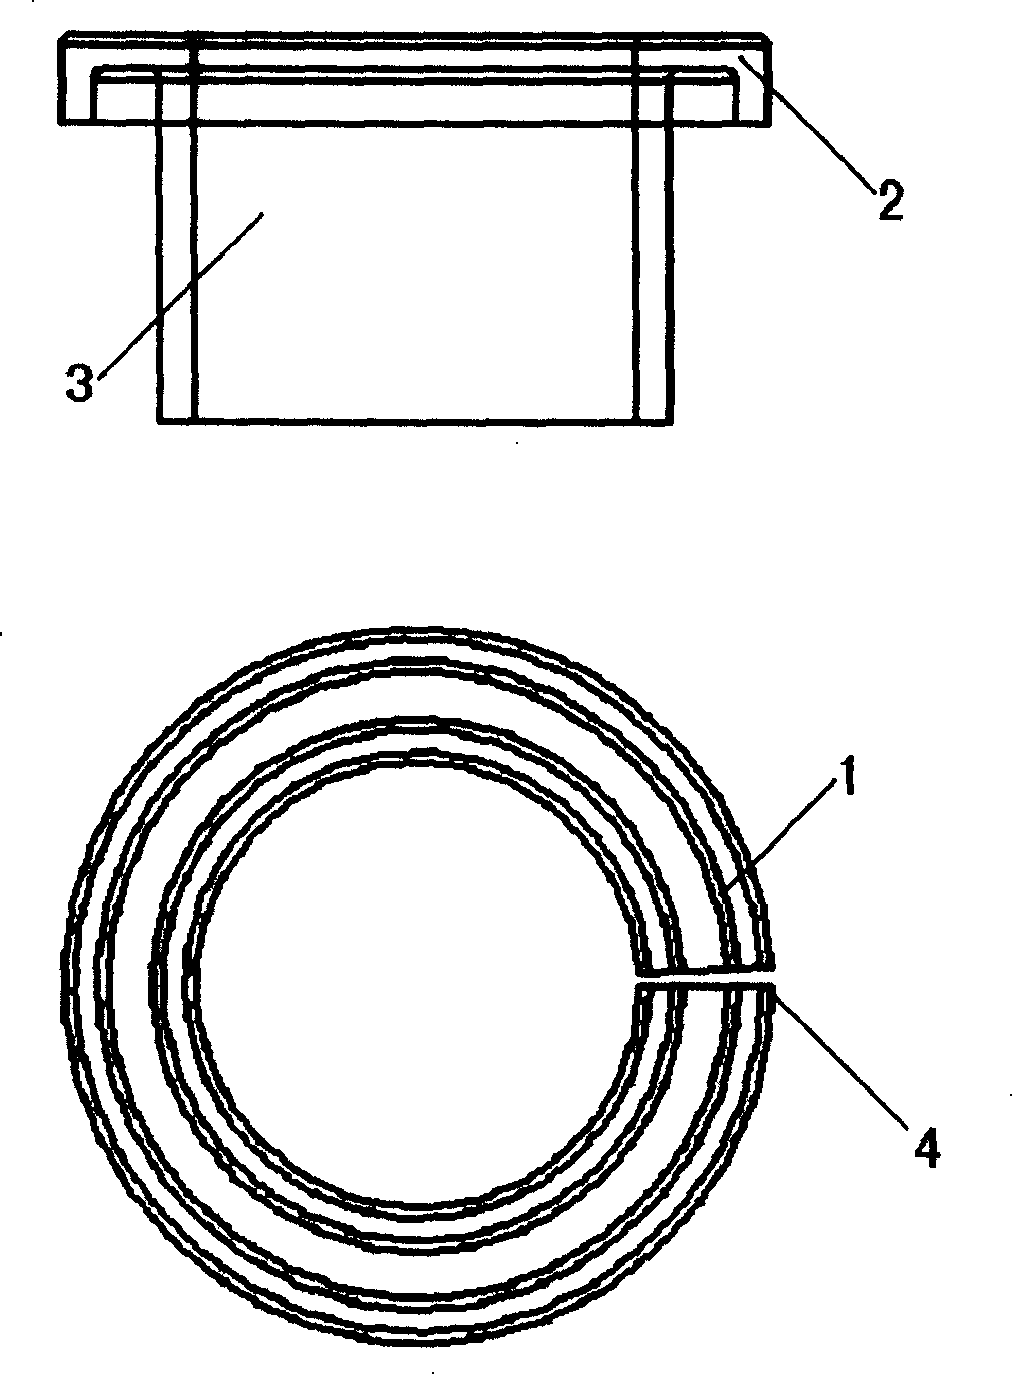 Air conditioner tubing circular lid structure